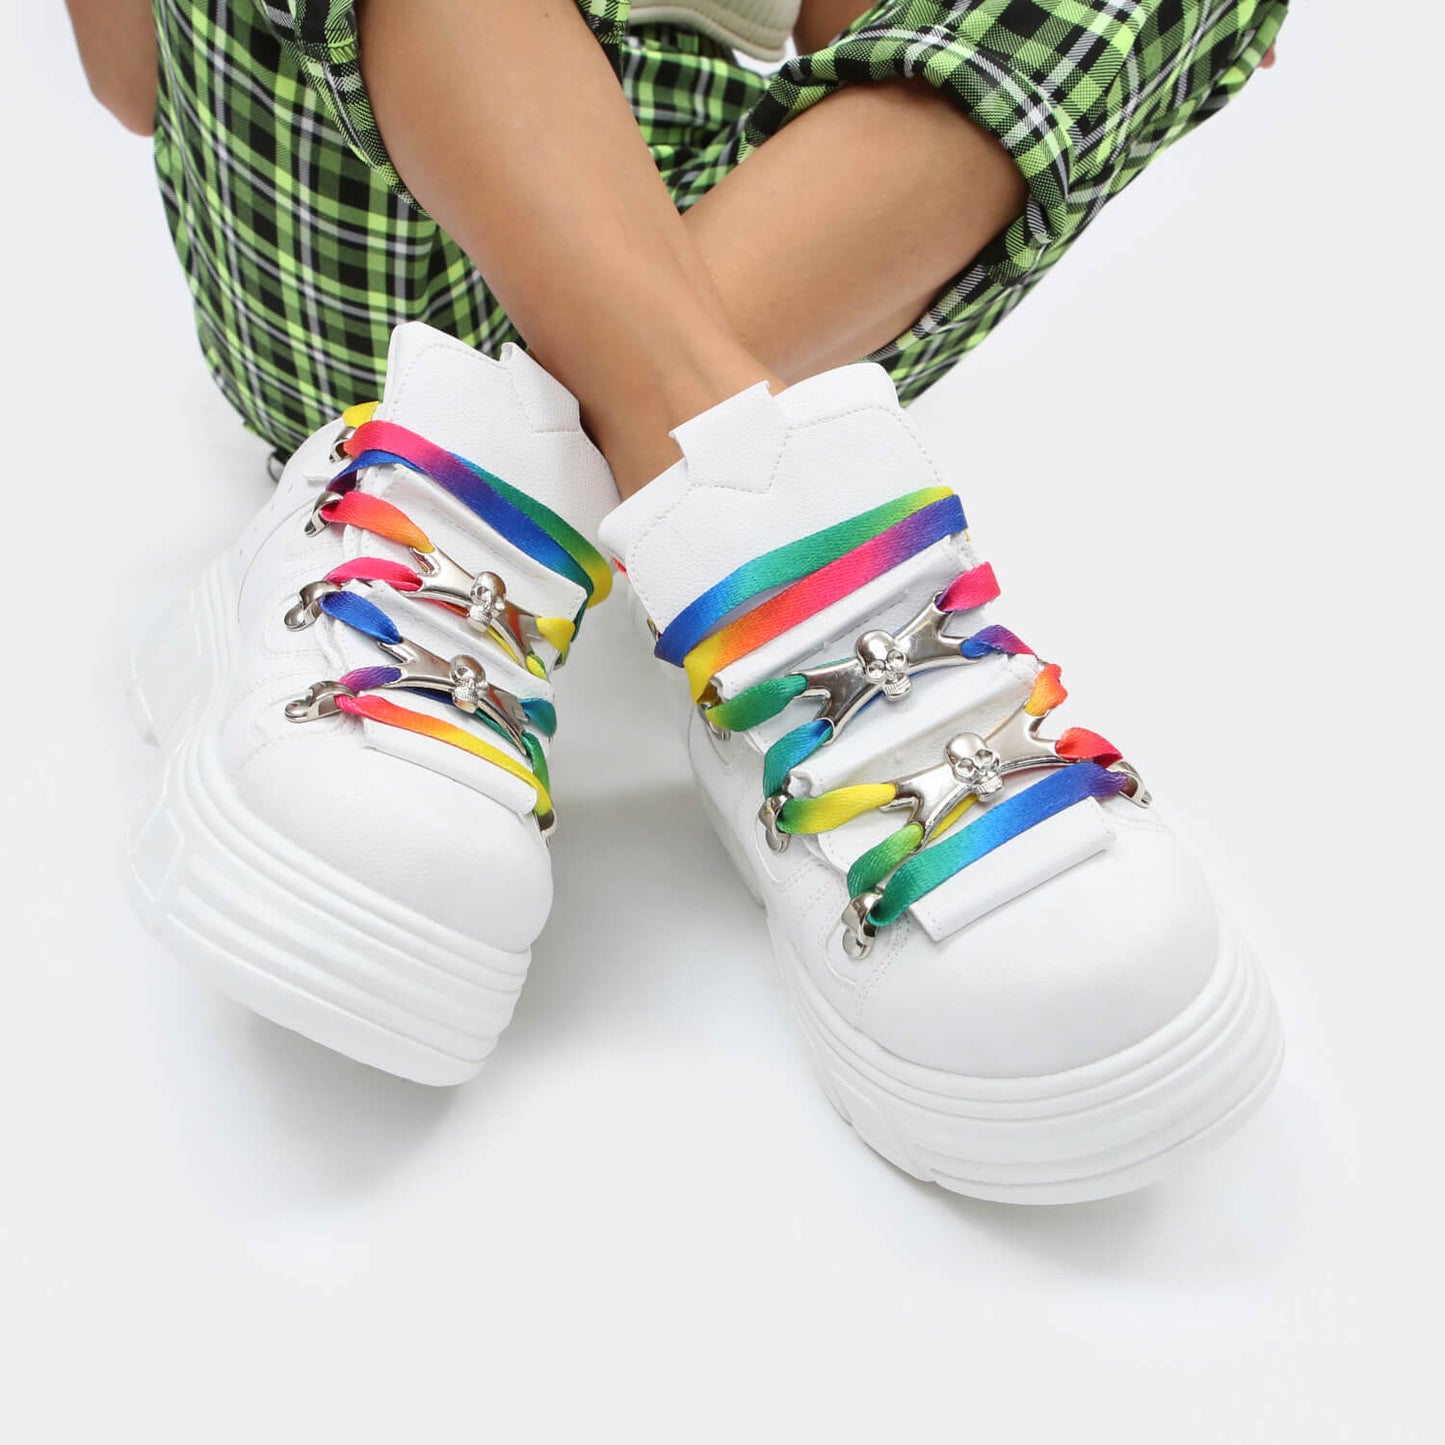 Rainbow Laces - Accessories - KOI Footwear - Multi - Front Example